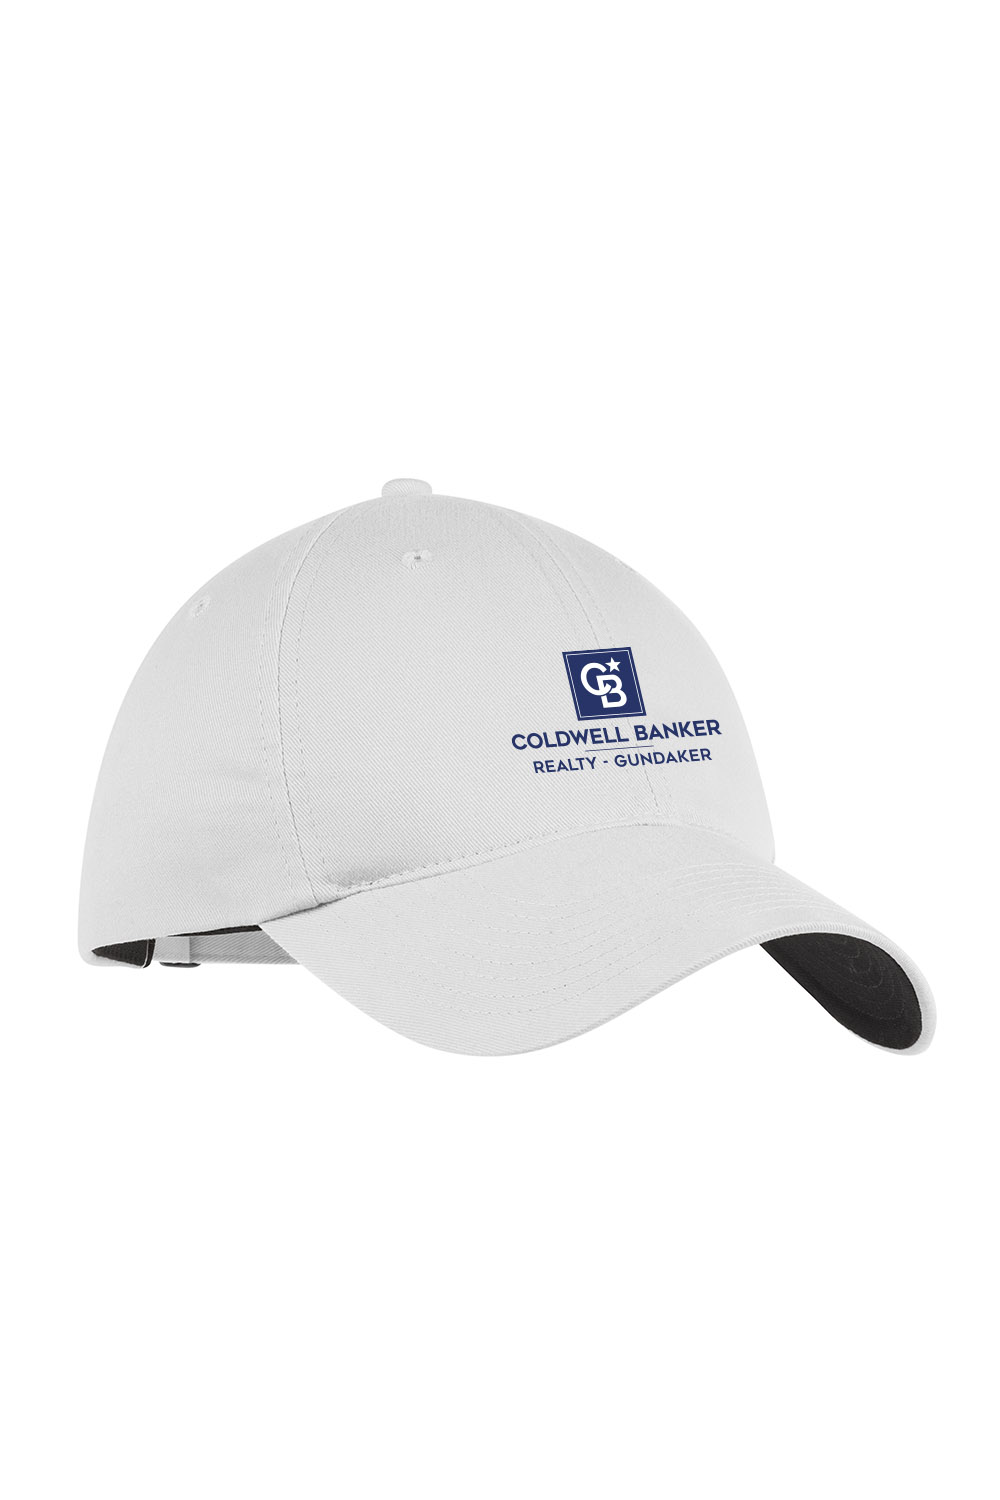 Nike Unstructured Twill Cap – Coldwell Banker Gundaker Promotional Products